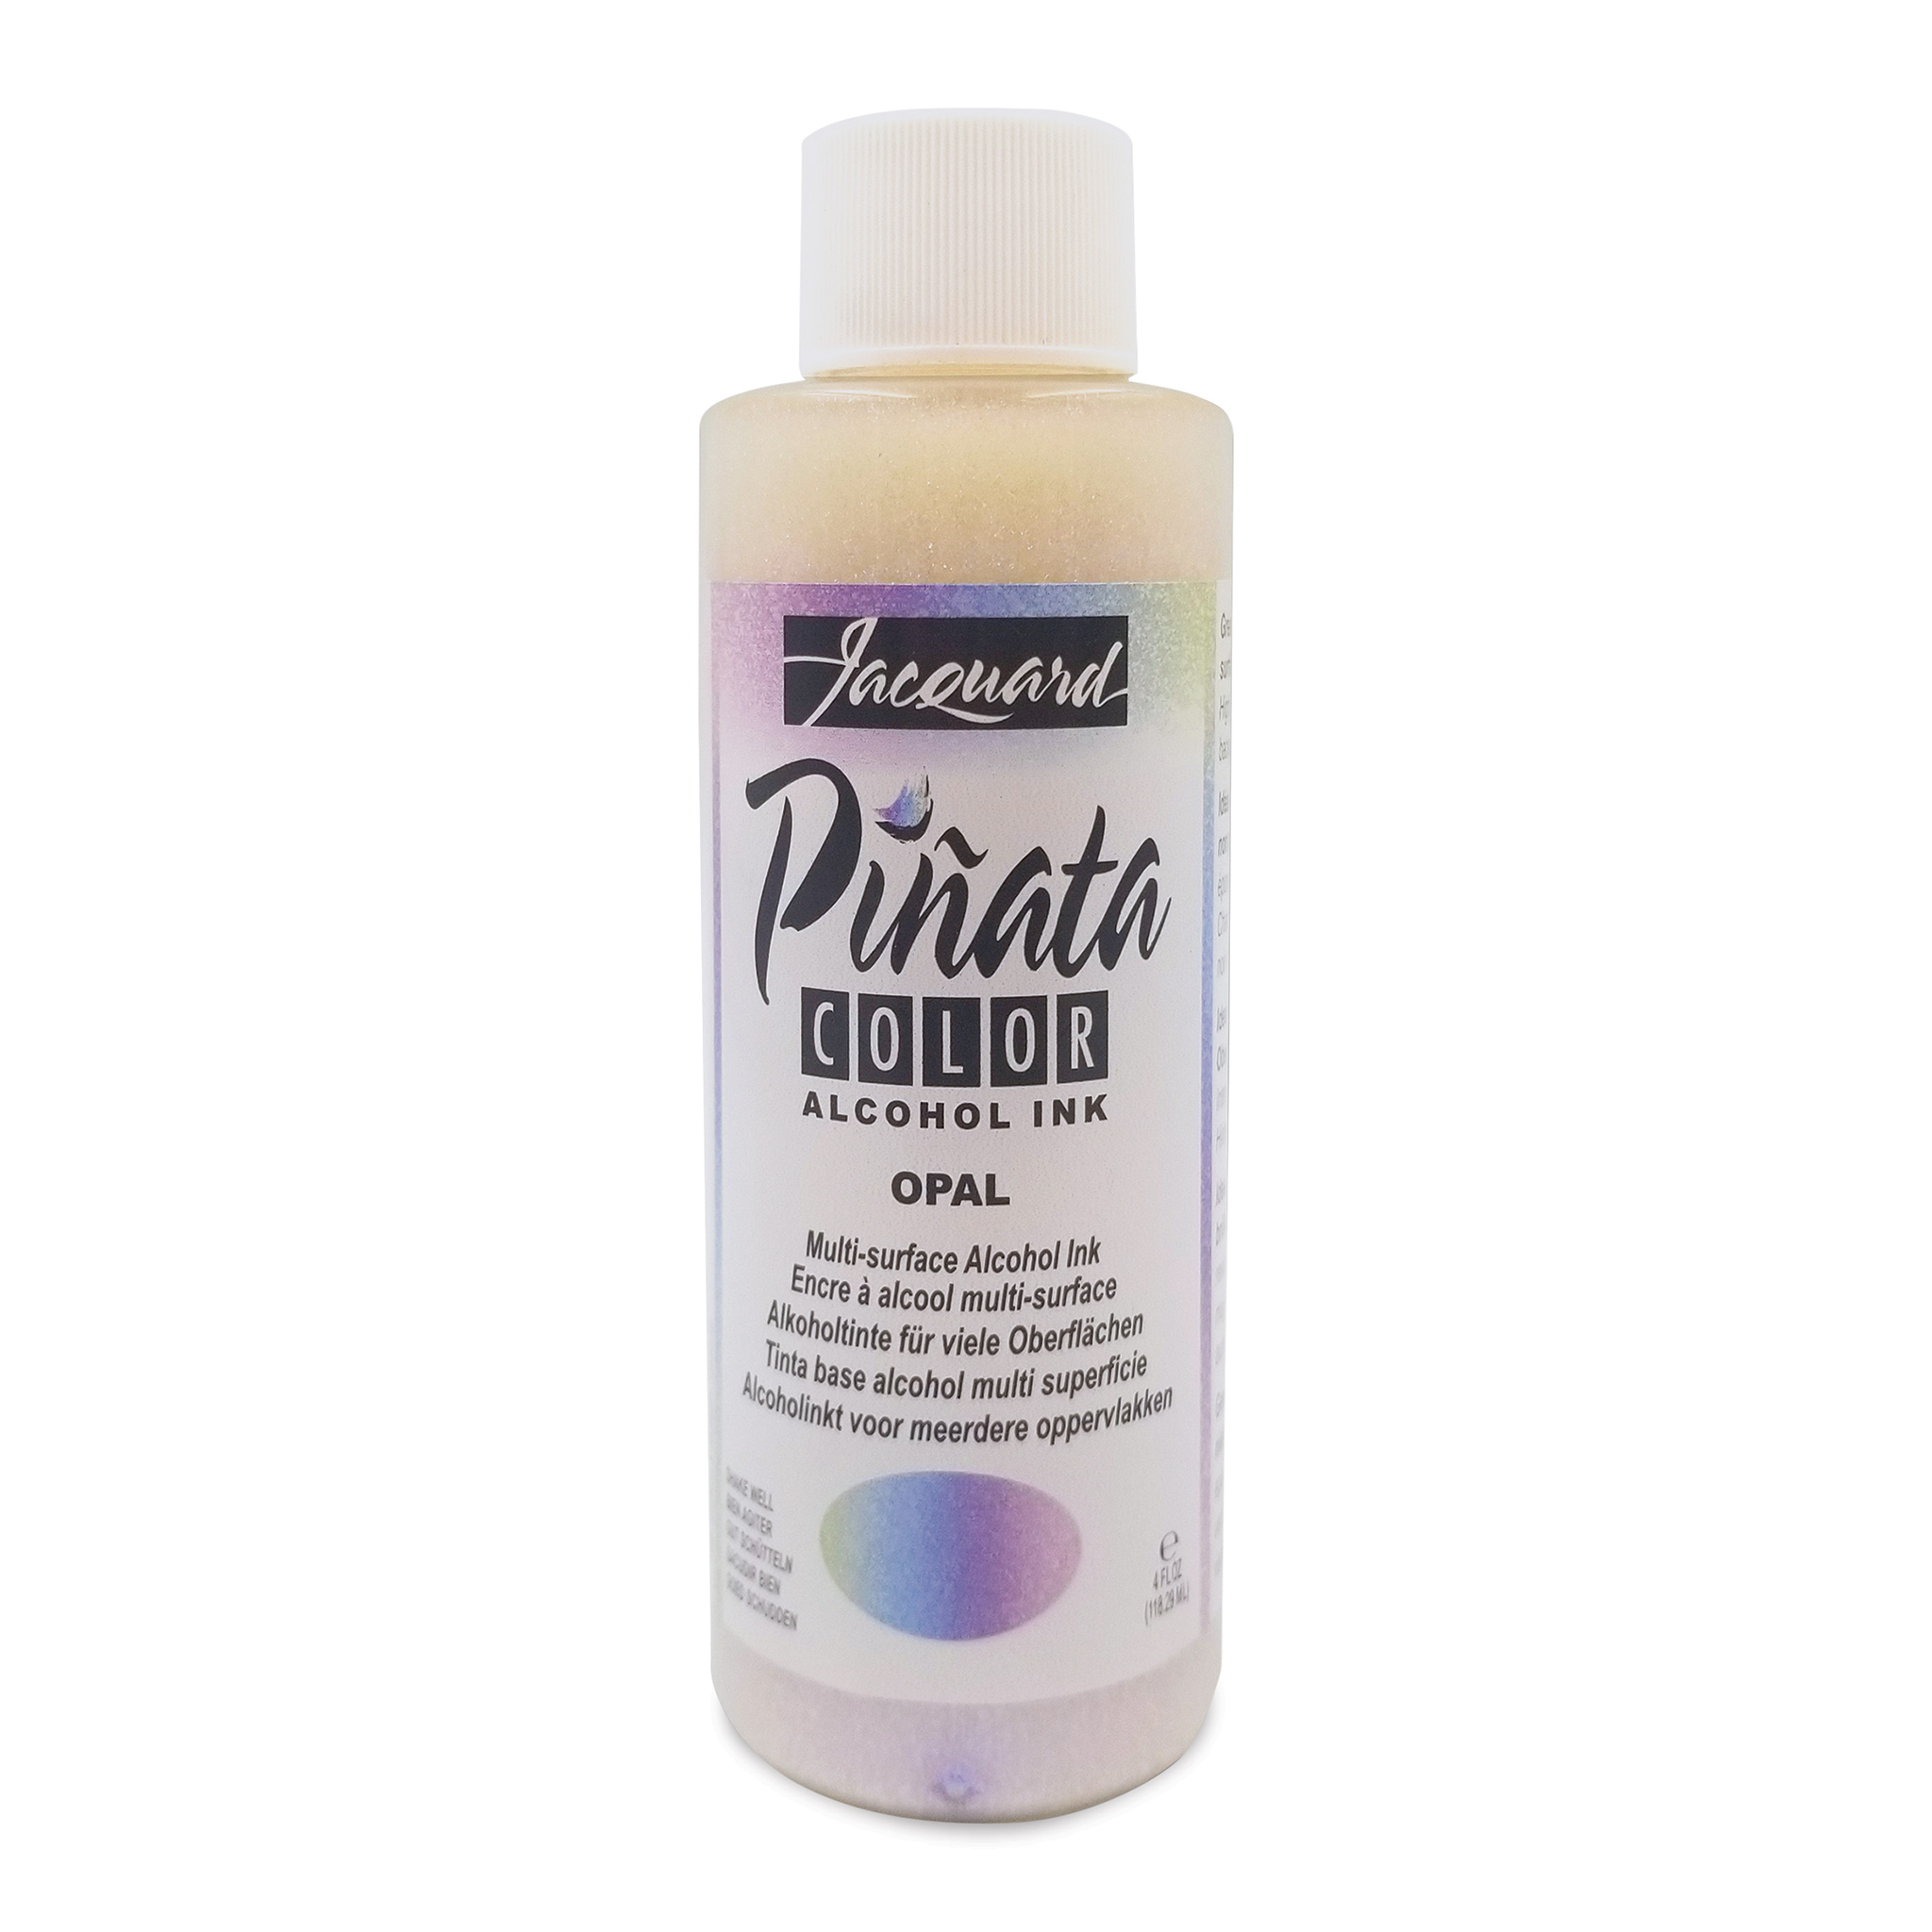 Pinata Color Alcohol Ink Clean Up Solution 1 oz